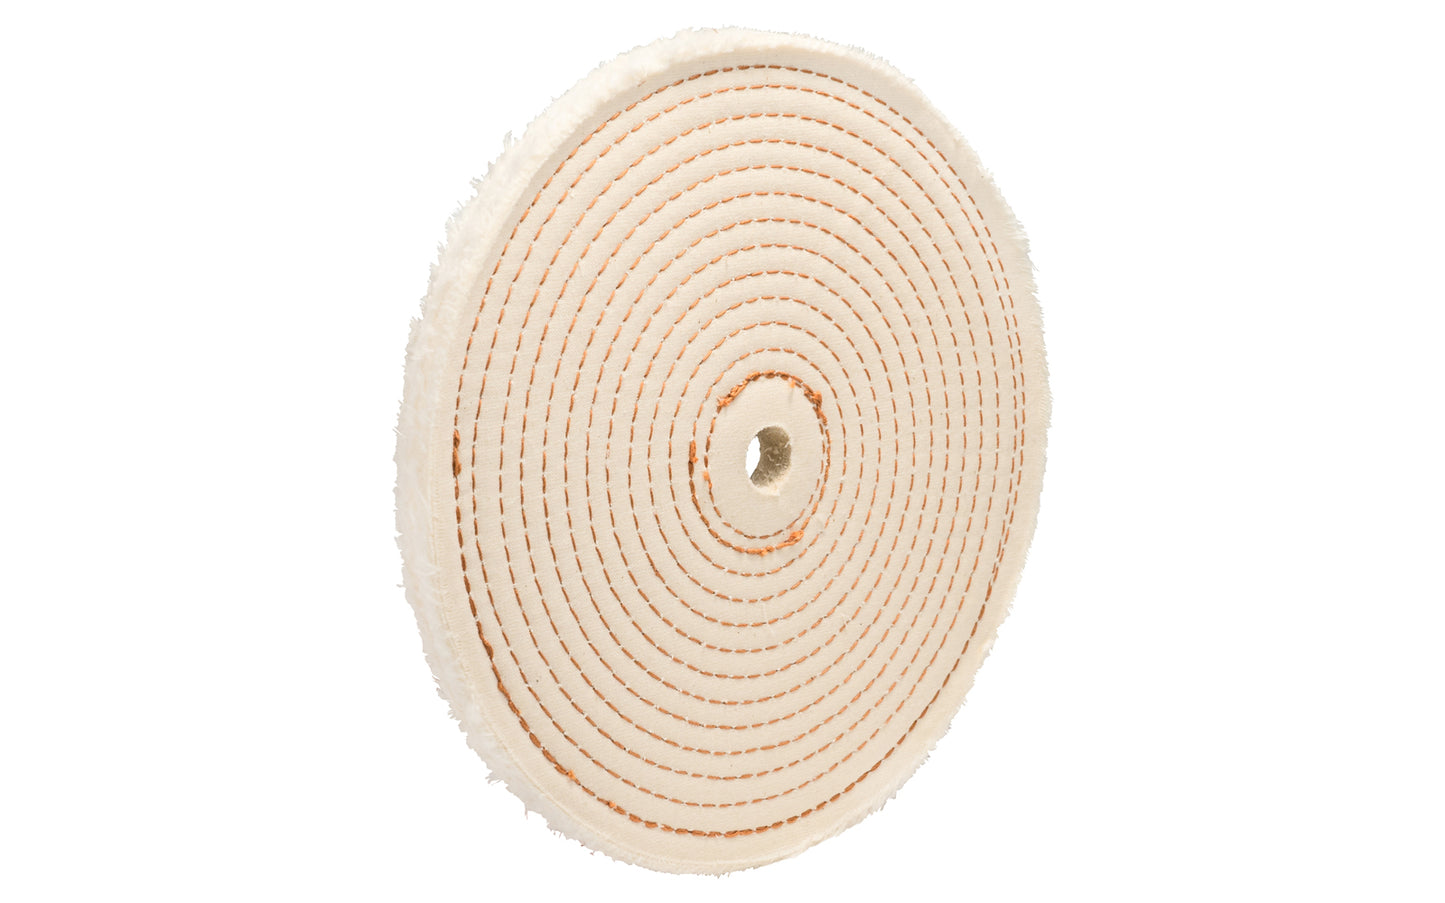 The 8" Spiral Sewn Buffing Wheel ~ 1/2" Thick for aggressive cutting & coarse buffing. 5/8" hole diameter. 1/2" wide thickness. Made in USA. This spiral sewn wheel is designed for prolong service. Good for coarse cutting & buffing, & flexible grinding. Stiffer cotton sheeting - Held together lockstitch sewing